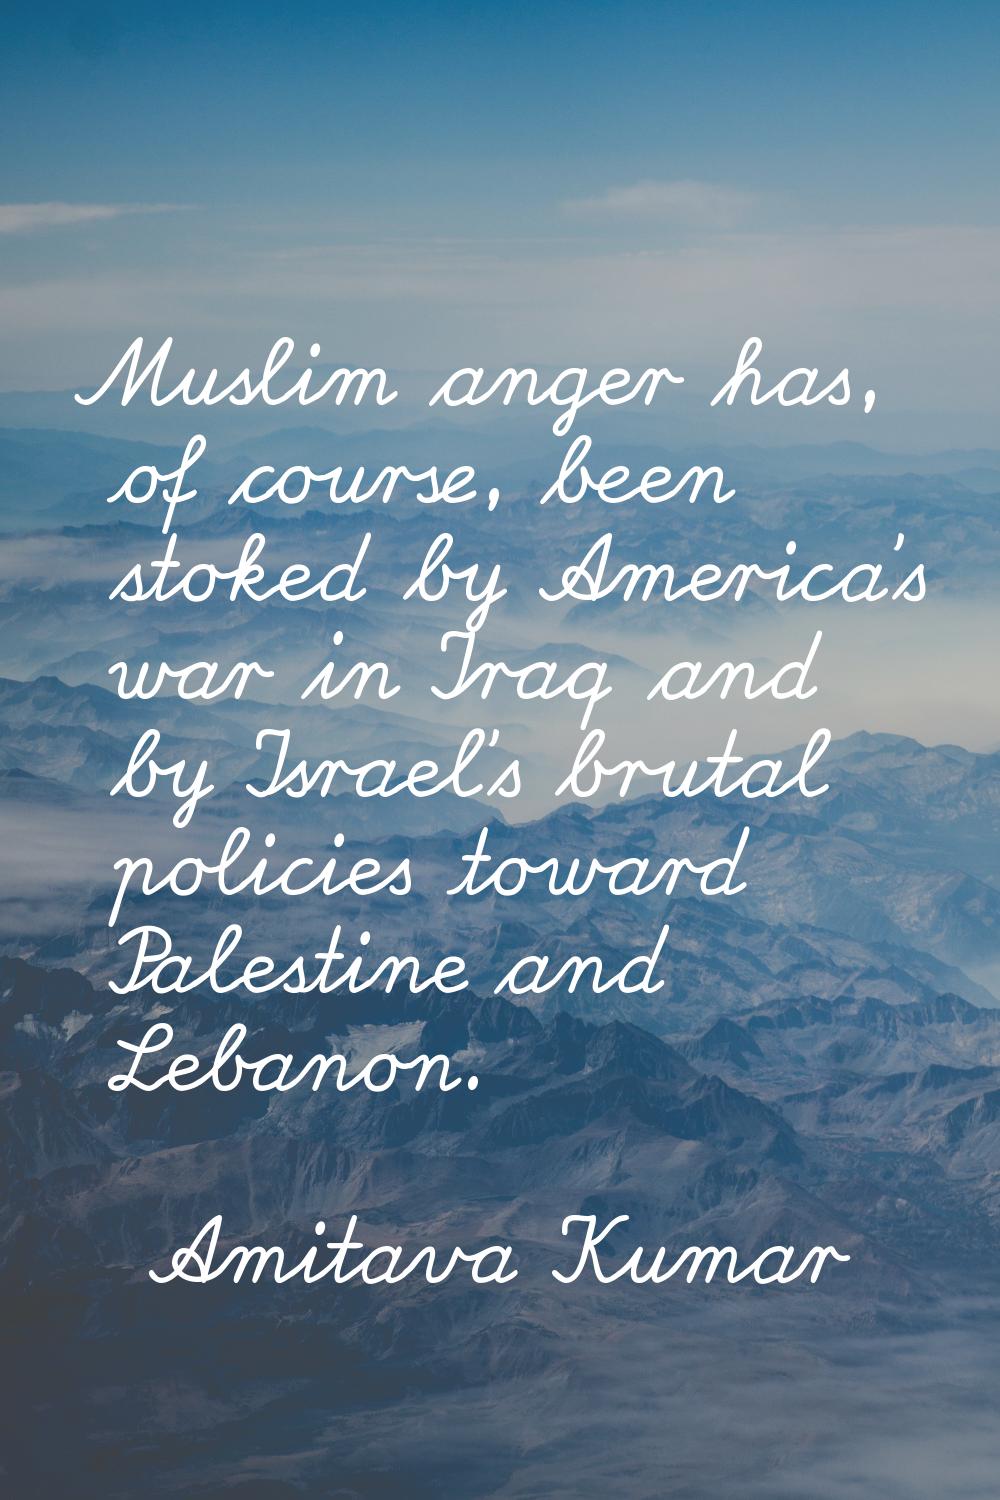 Muslim anger has, of course, been stoked by America's war in Iraq and by Israel's brutal policies t